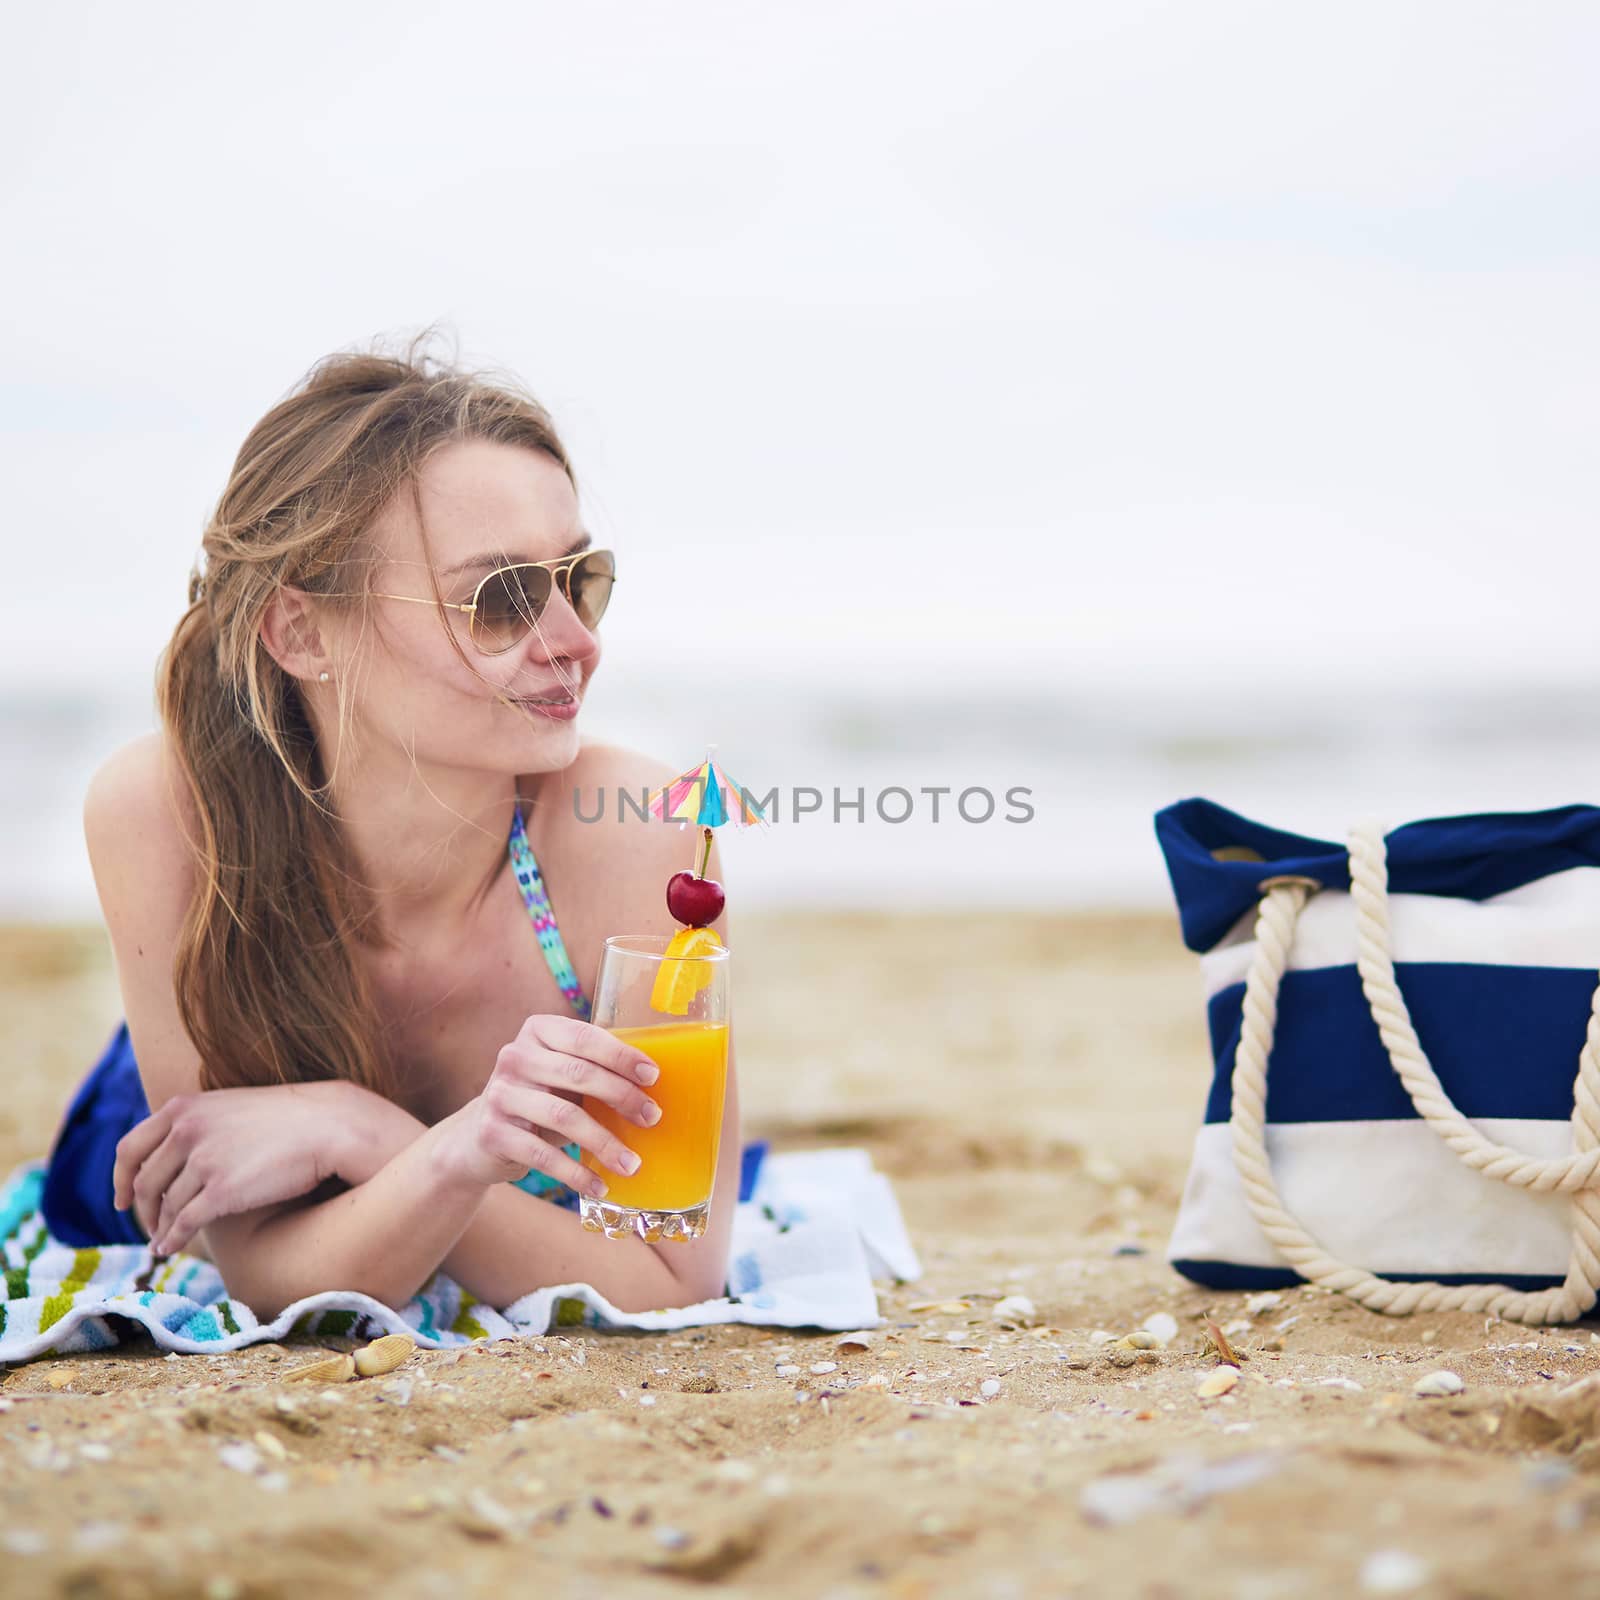 Beautiful young woman relaxing and sunbathing on beach, drinking delicious fruit or alcohol cocktail with paper umbrella, beach bag on sand near the model